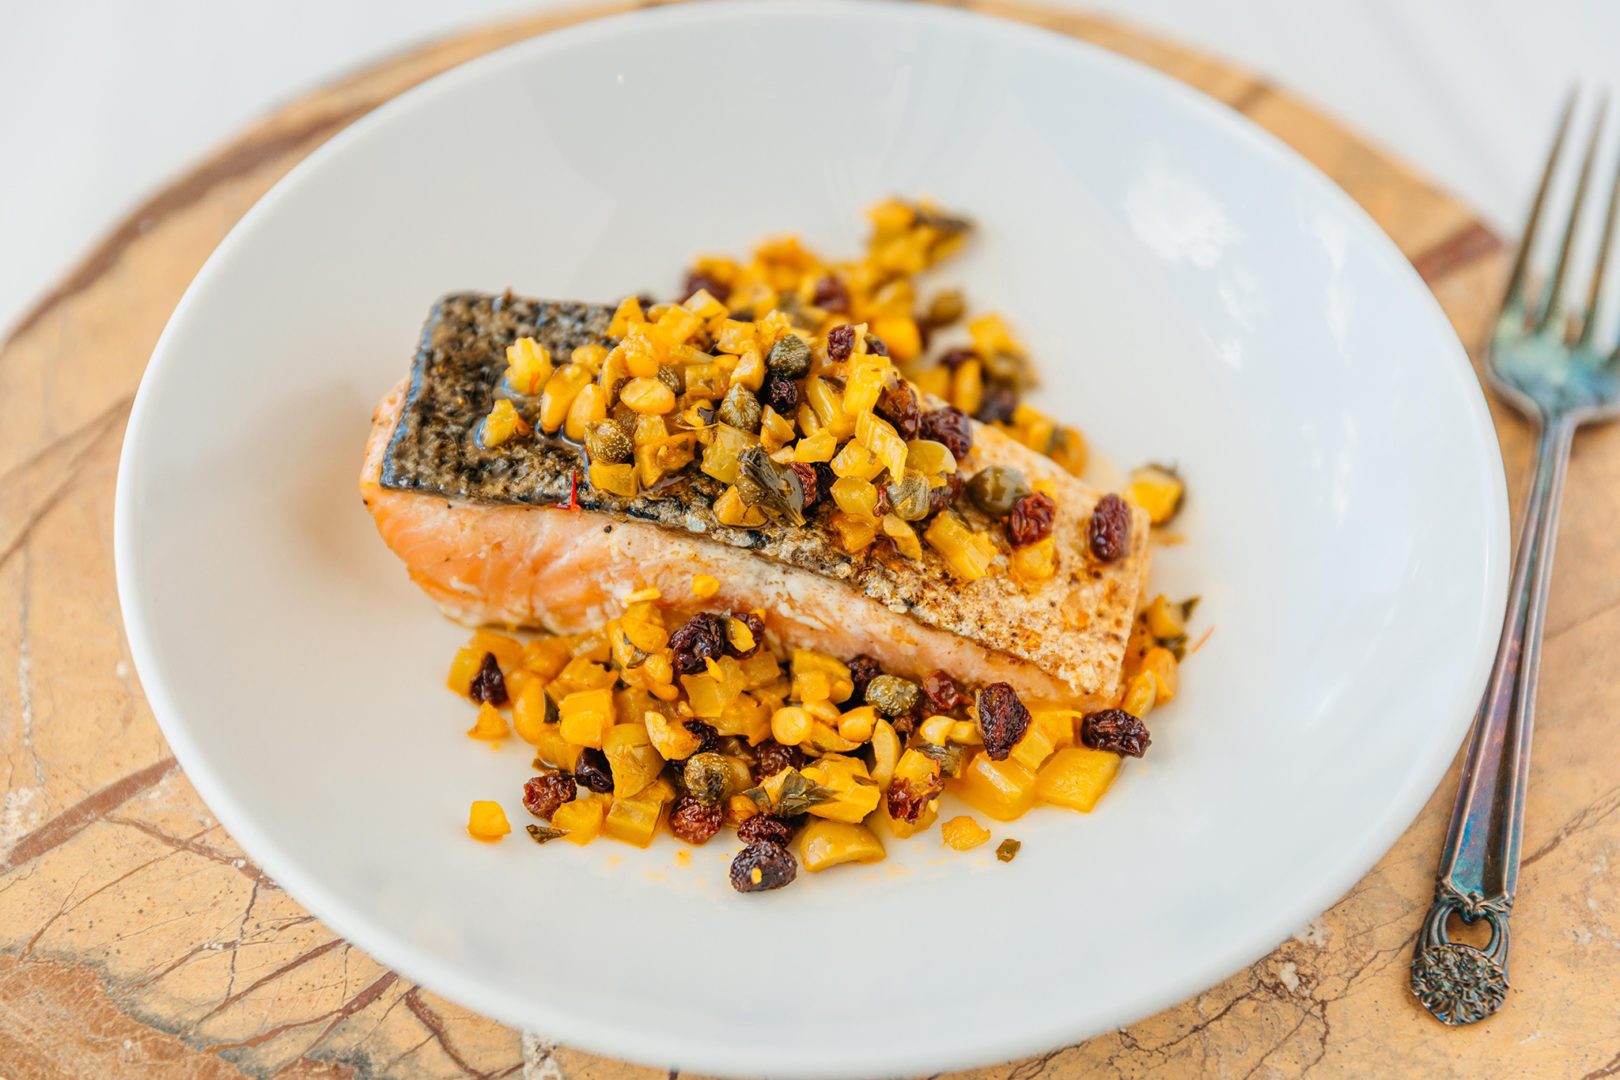 Seared Salmon with Pine Nut & Currant Salsa